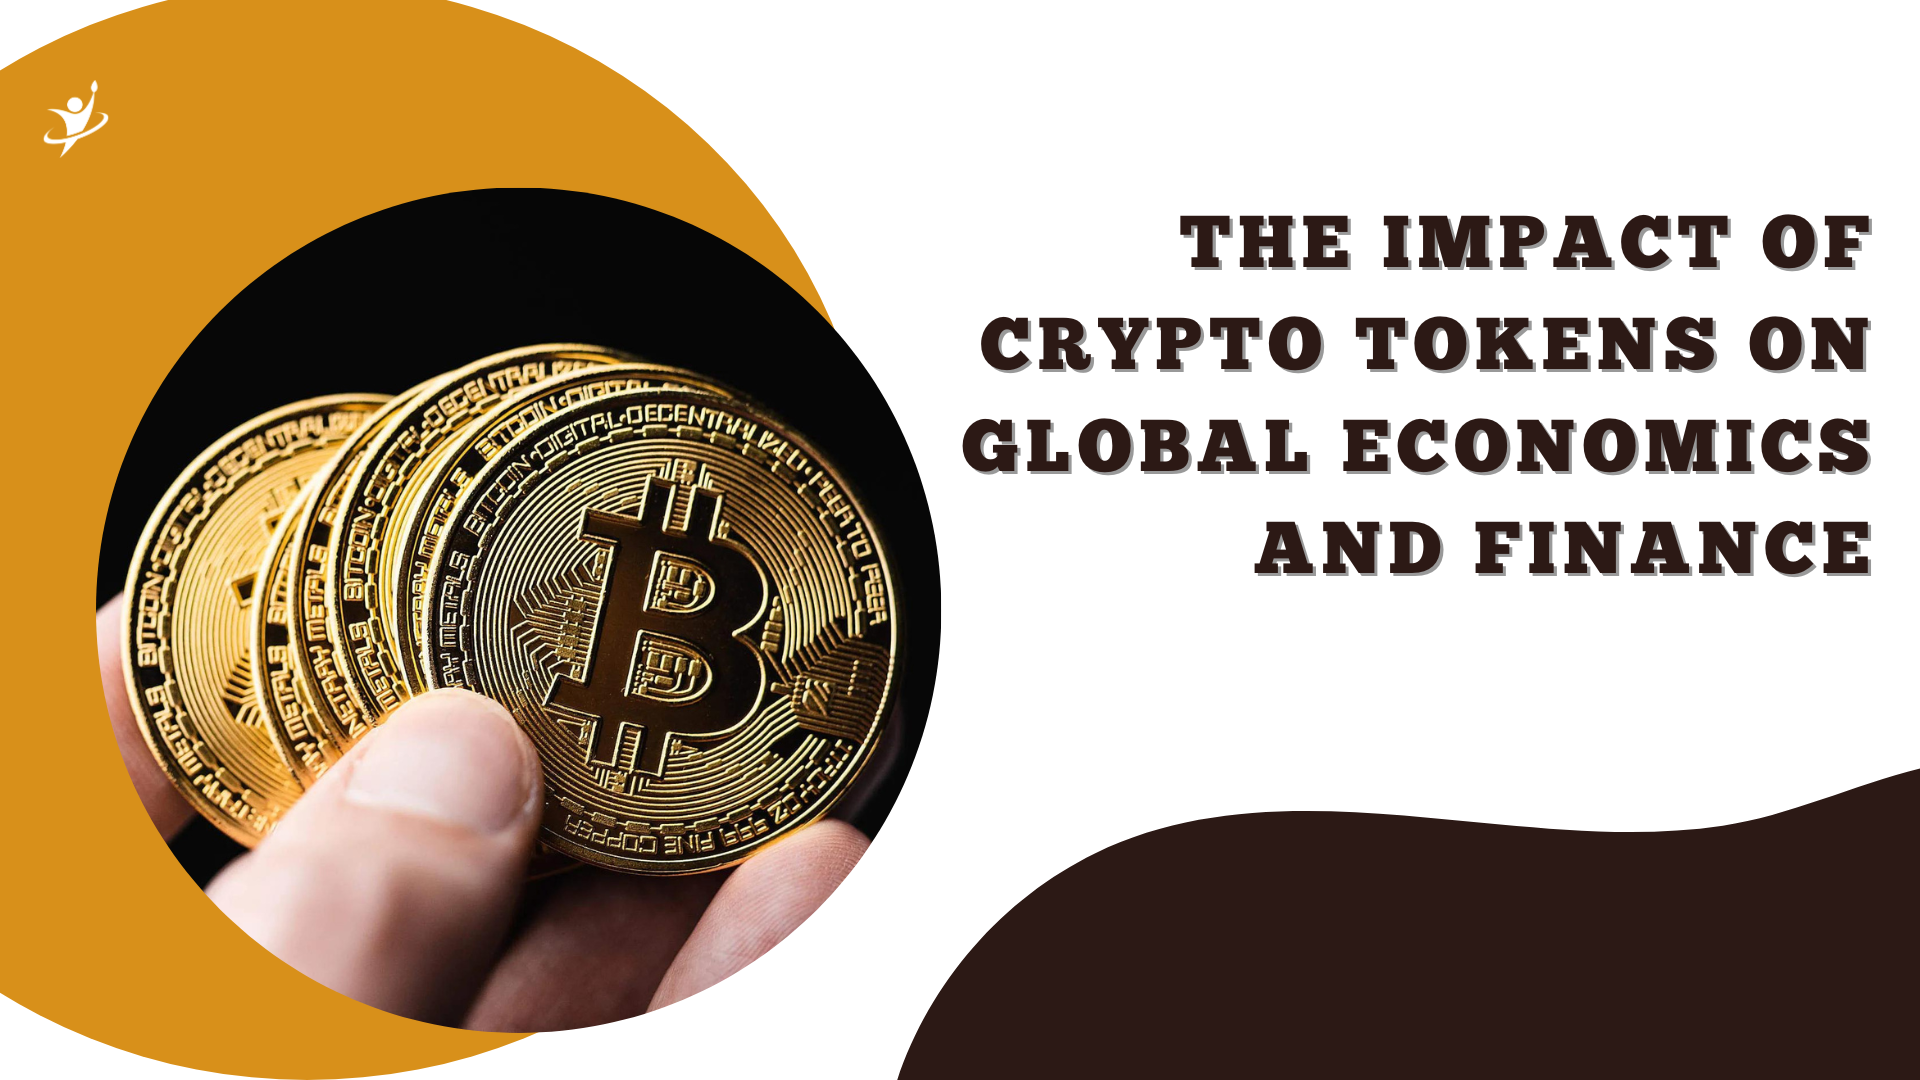 The Impact of Crypto Tokens on Global Economics and Finance